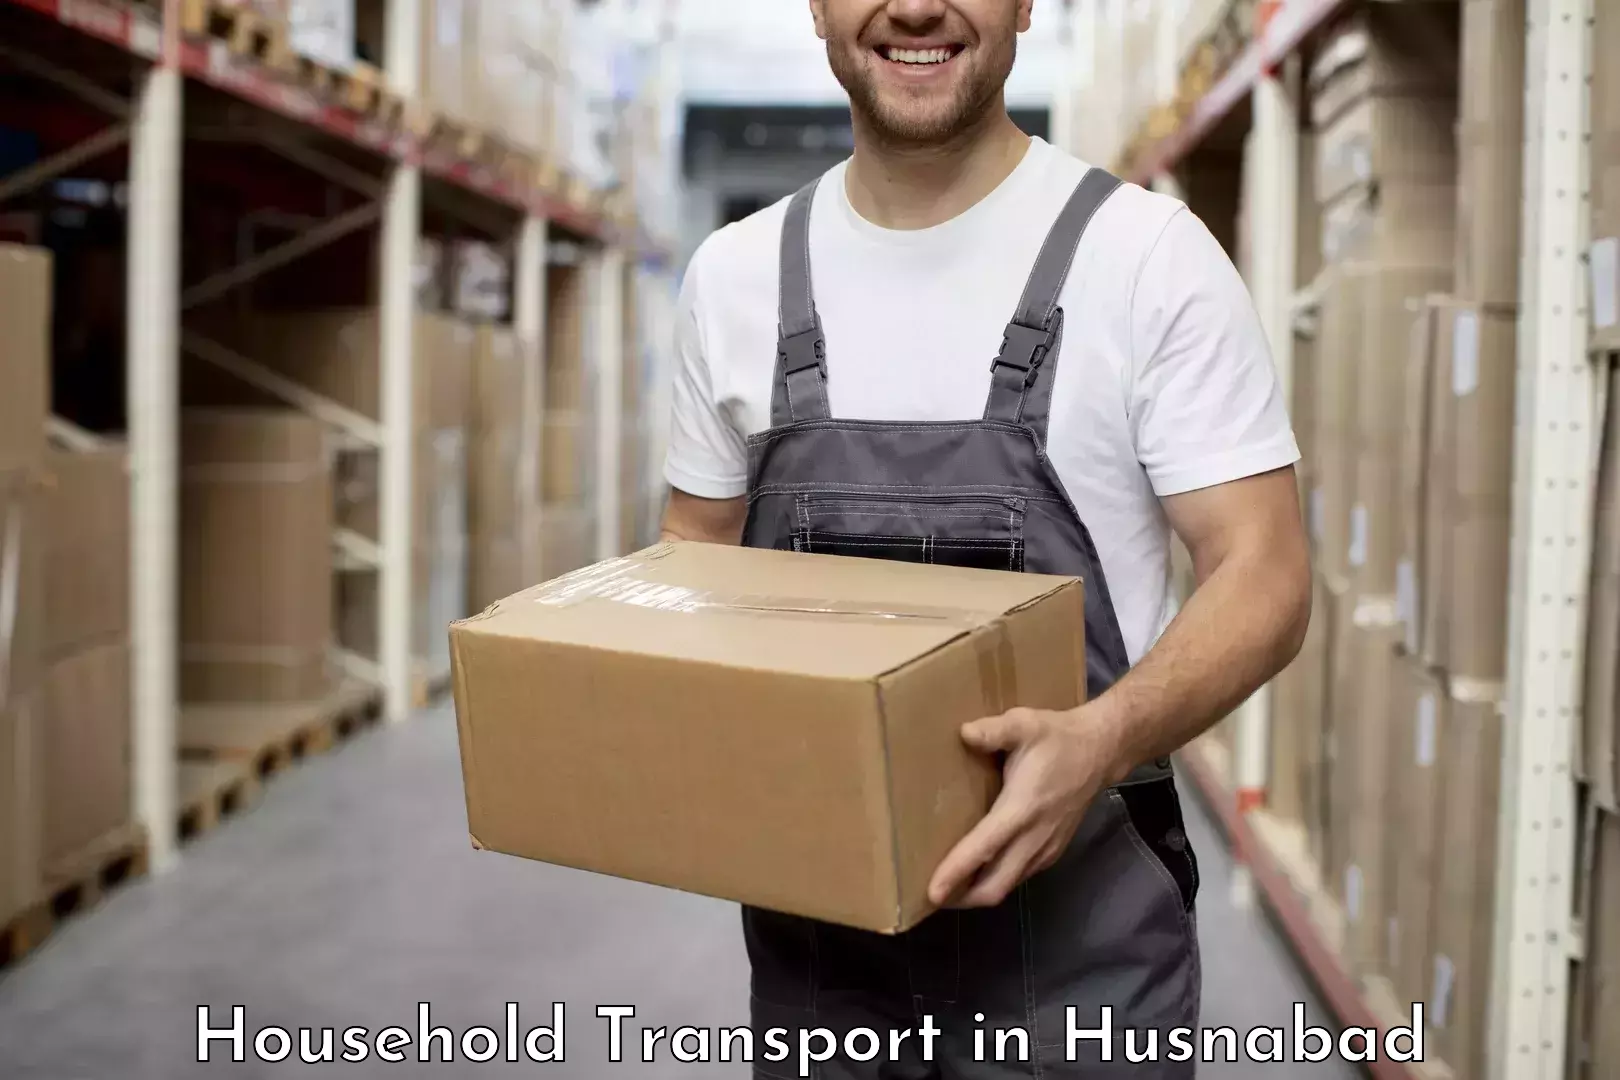 Furniture transport specialists in Husnabad